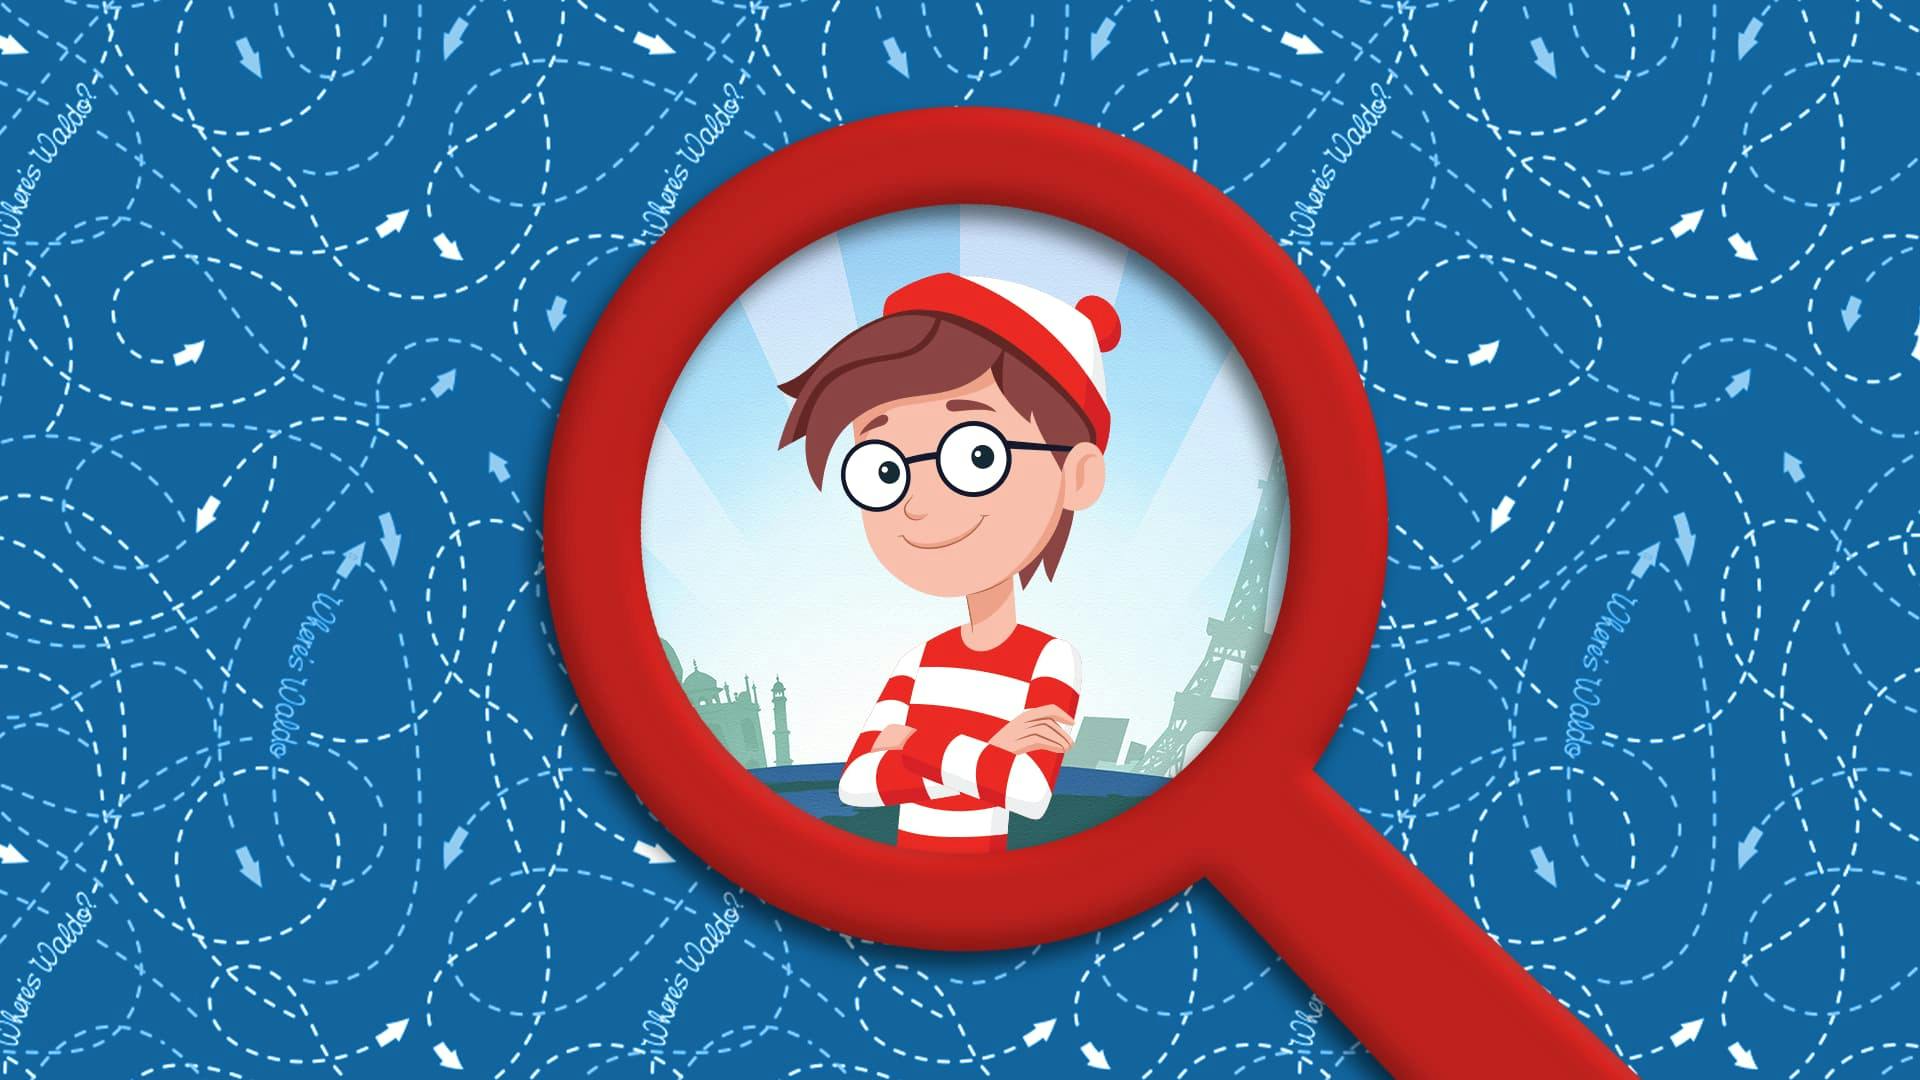 Wally from Where's Wally stands in the centre of a giant magnifying glass.